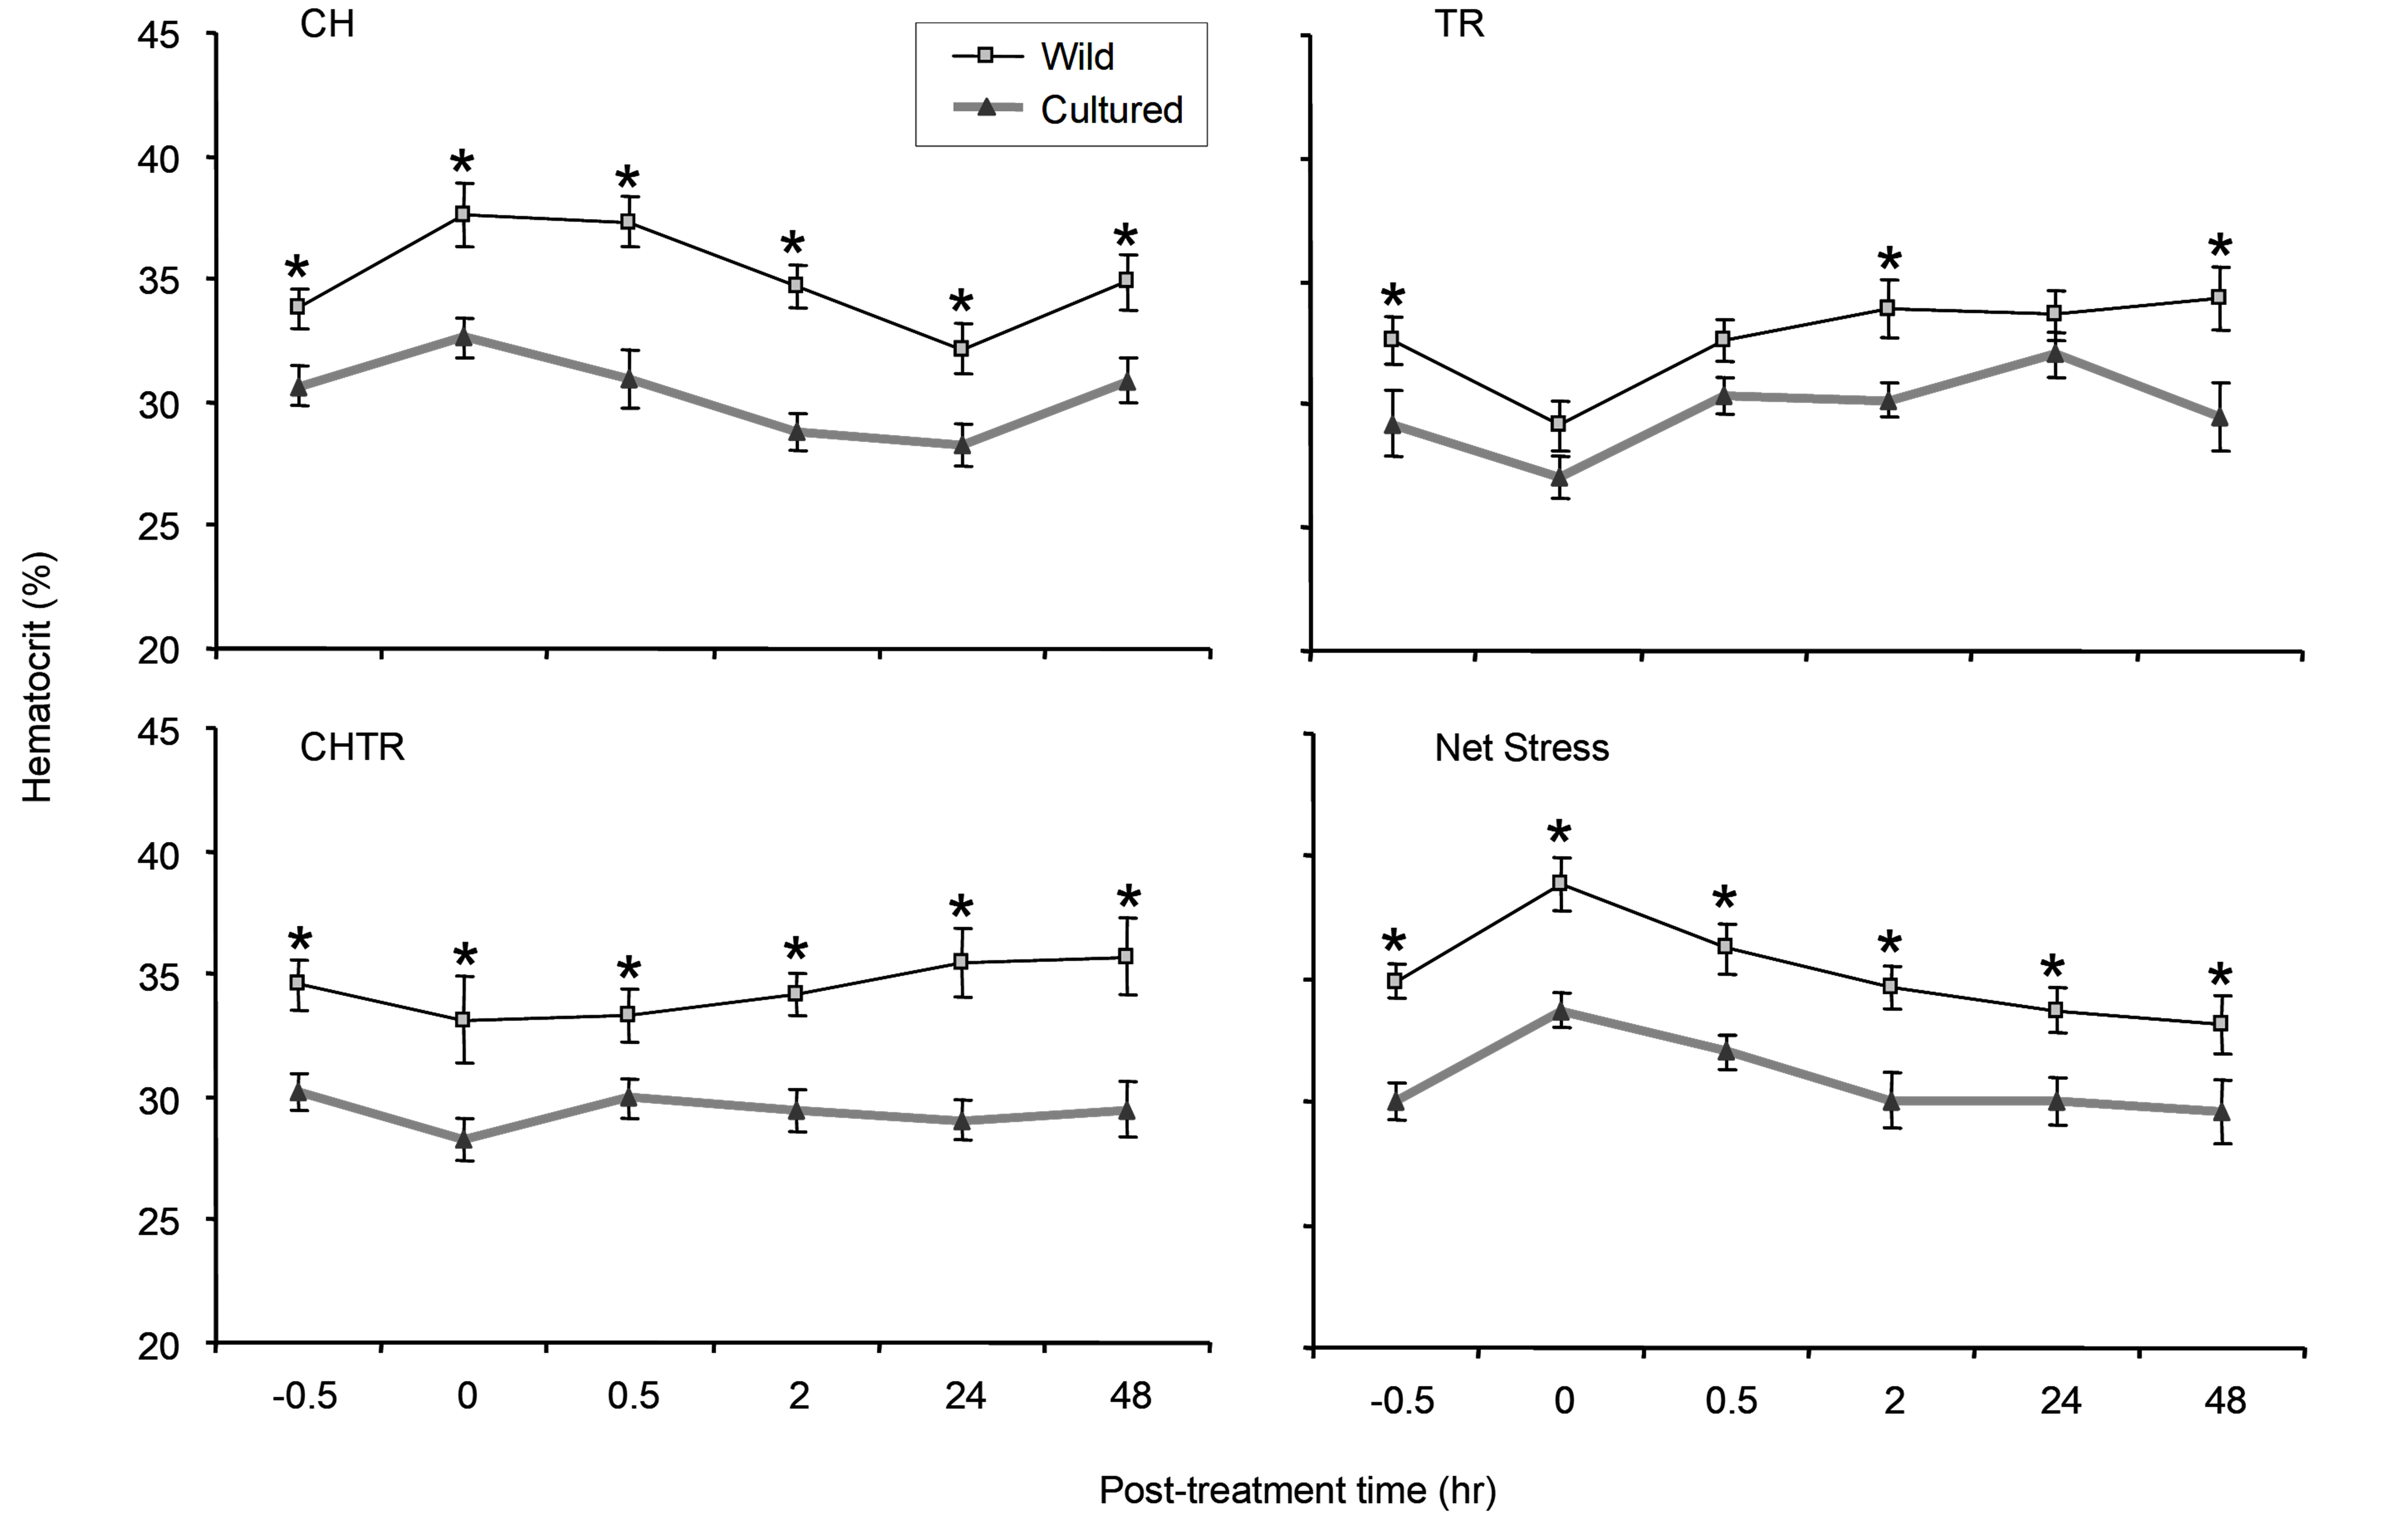 Four graphs. X axis in all graphs is post-treatment time ranging from -0.5 to 48 hours. Y axis in all graphs is Hematocrit levels ranging from 20 to 45%. Mean hematocrit levels in wild Delta Smelt post-treatment in all experiments were higher at every hour interval than mean hematocrit levels in cultured Delta Smelt. Significant difference in mean hematocrit levels between wild and cultured Delta Smelt are seen at every hour interval in the CH, CHTR and NS experiments, and at the -0.5, 2 and 48 hour intervals in the TR experiment.